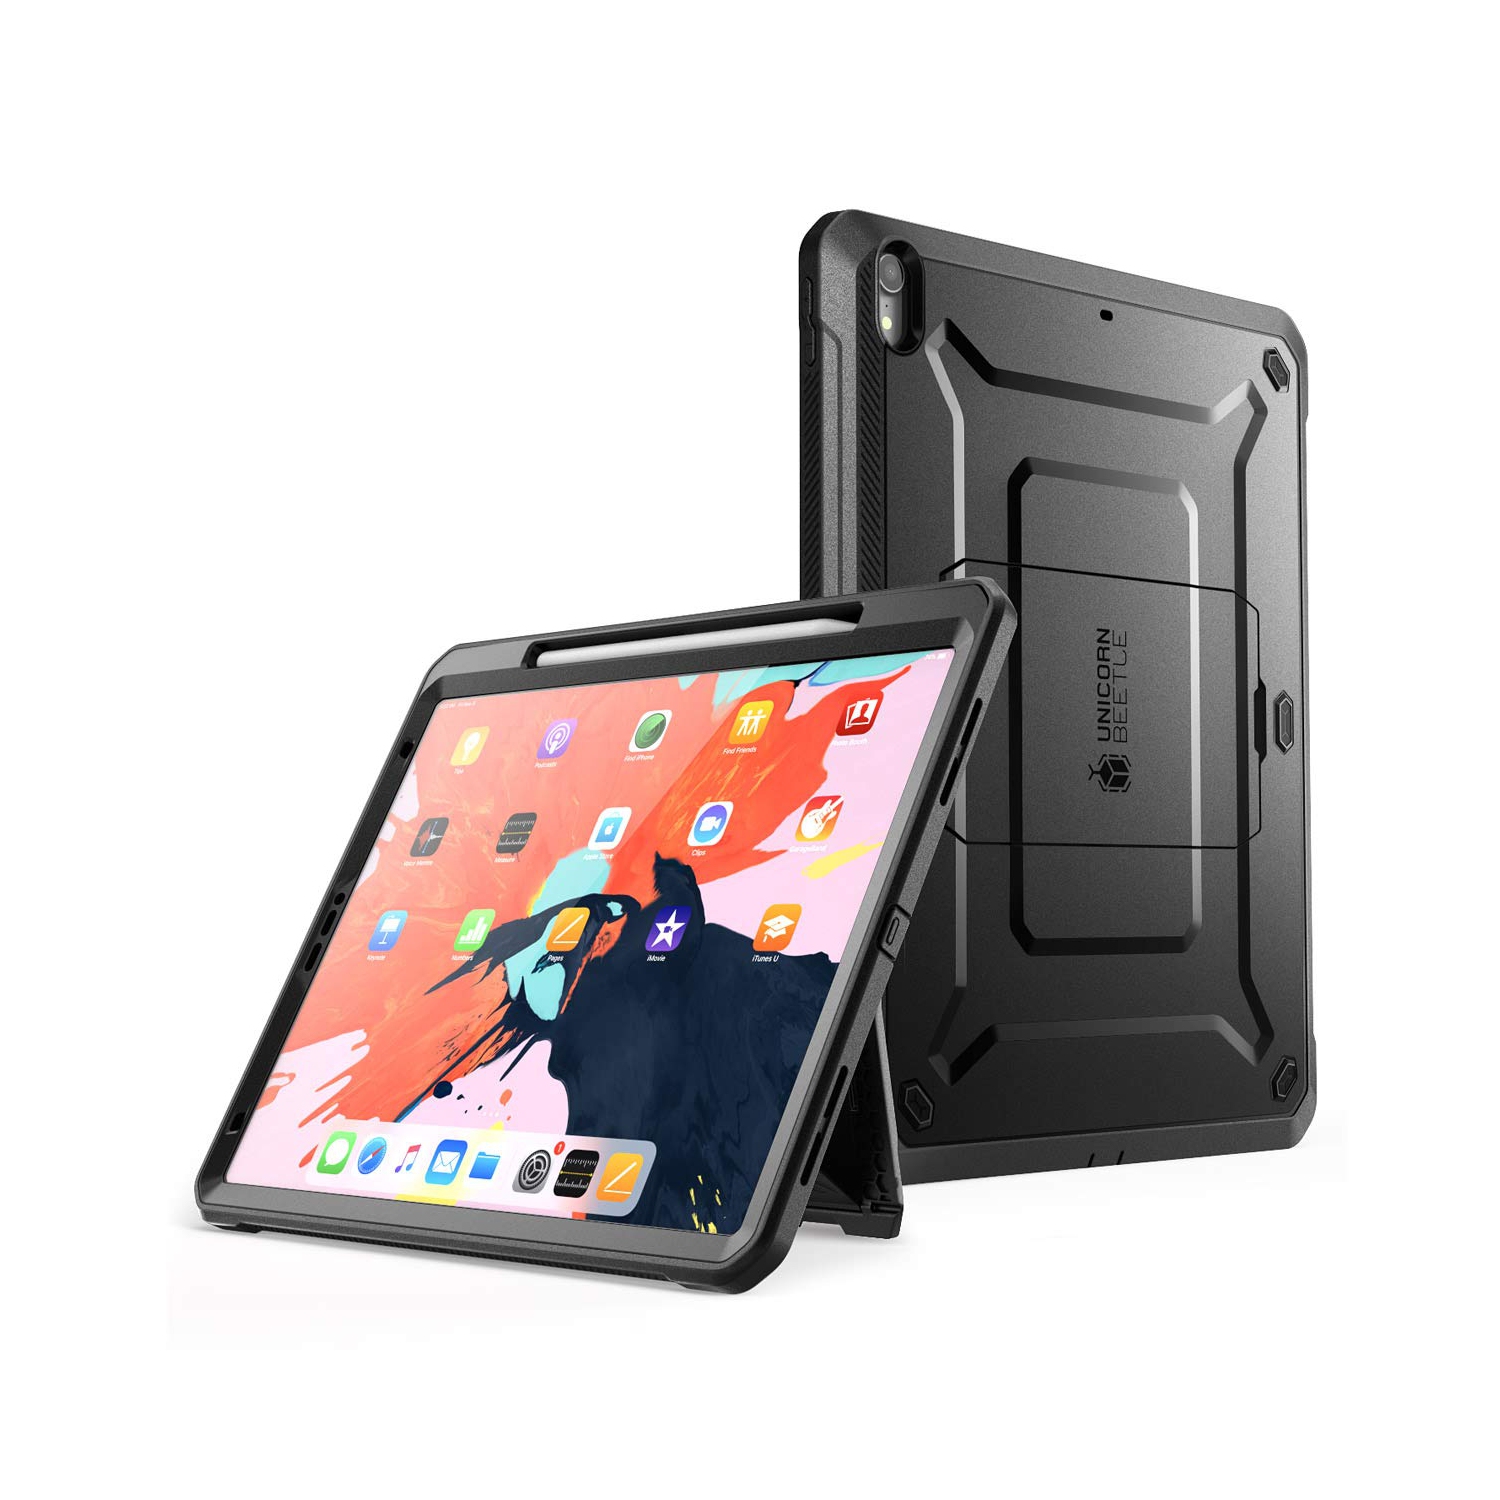 Supcase UB Pro Series Case for iPad Pro 12.9 2018, Support Apple Pencil Charging with Built-in Screen Protector Full-Body Ru